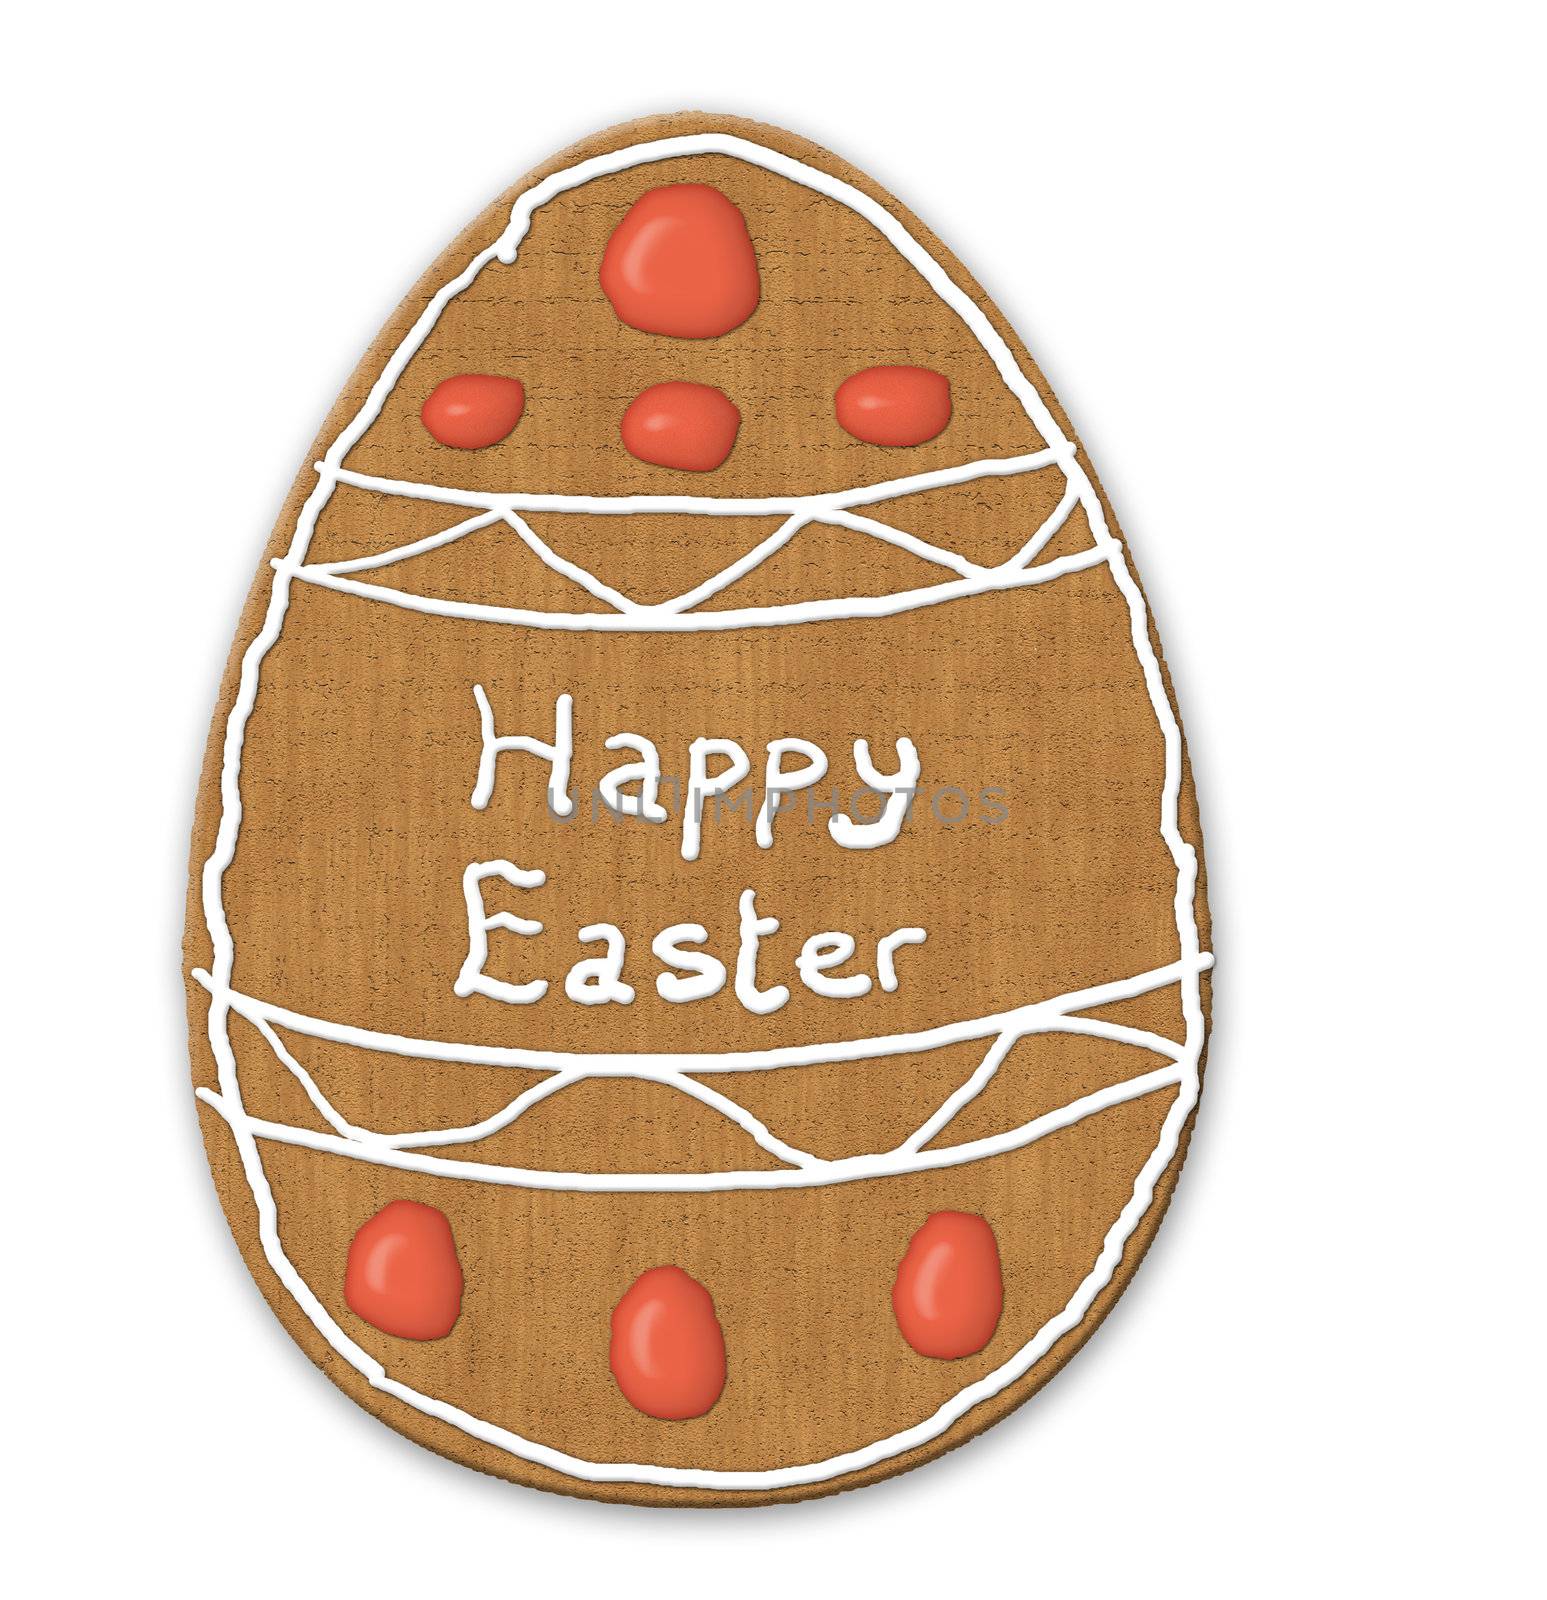 Illustration of an Easter egg cookie or biscuit with Happy Easter written in icing